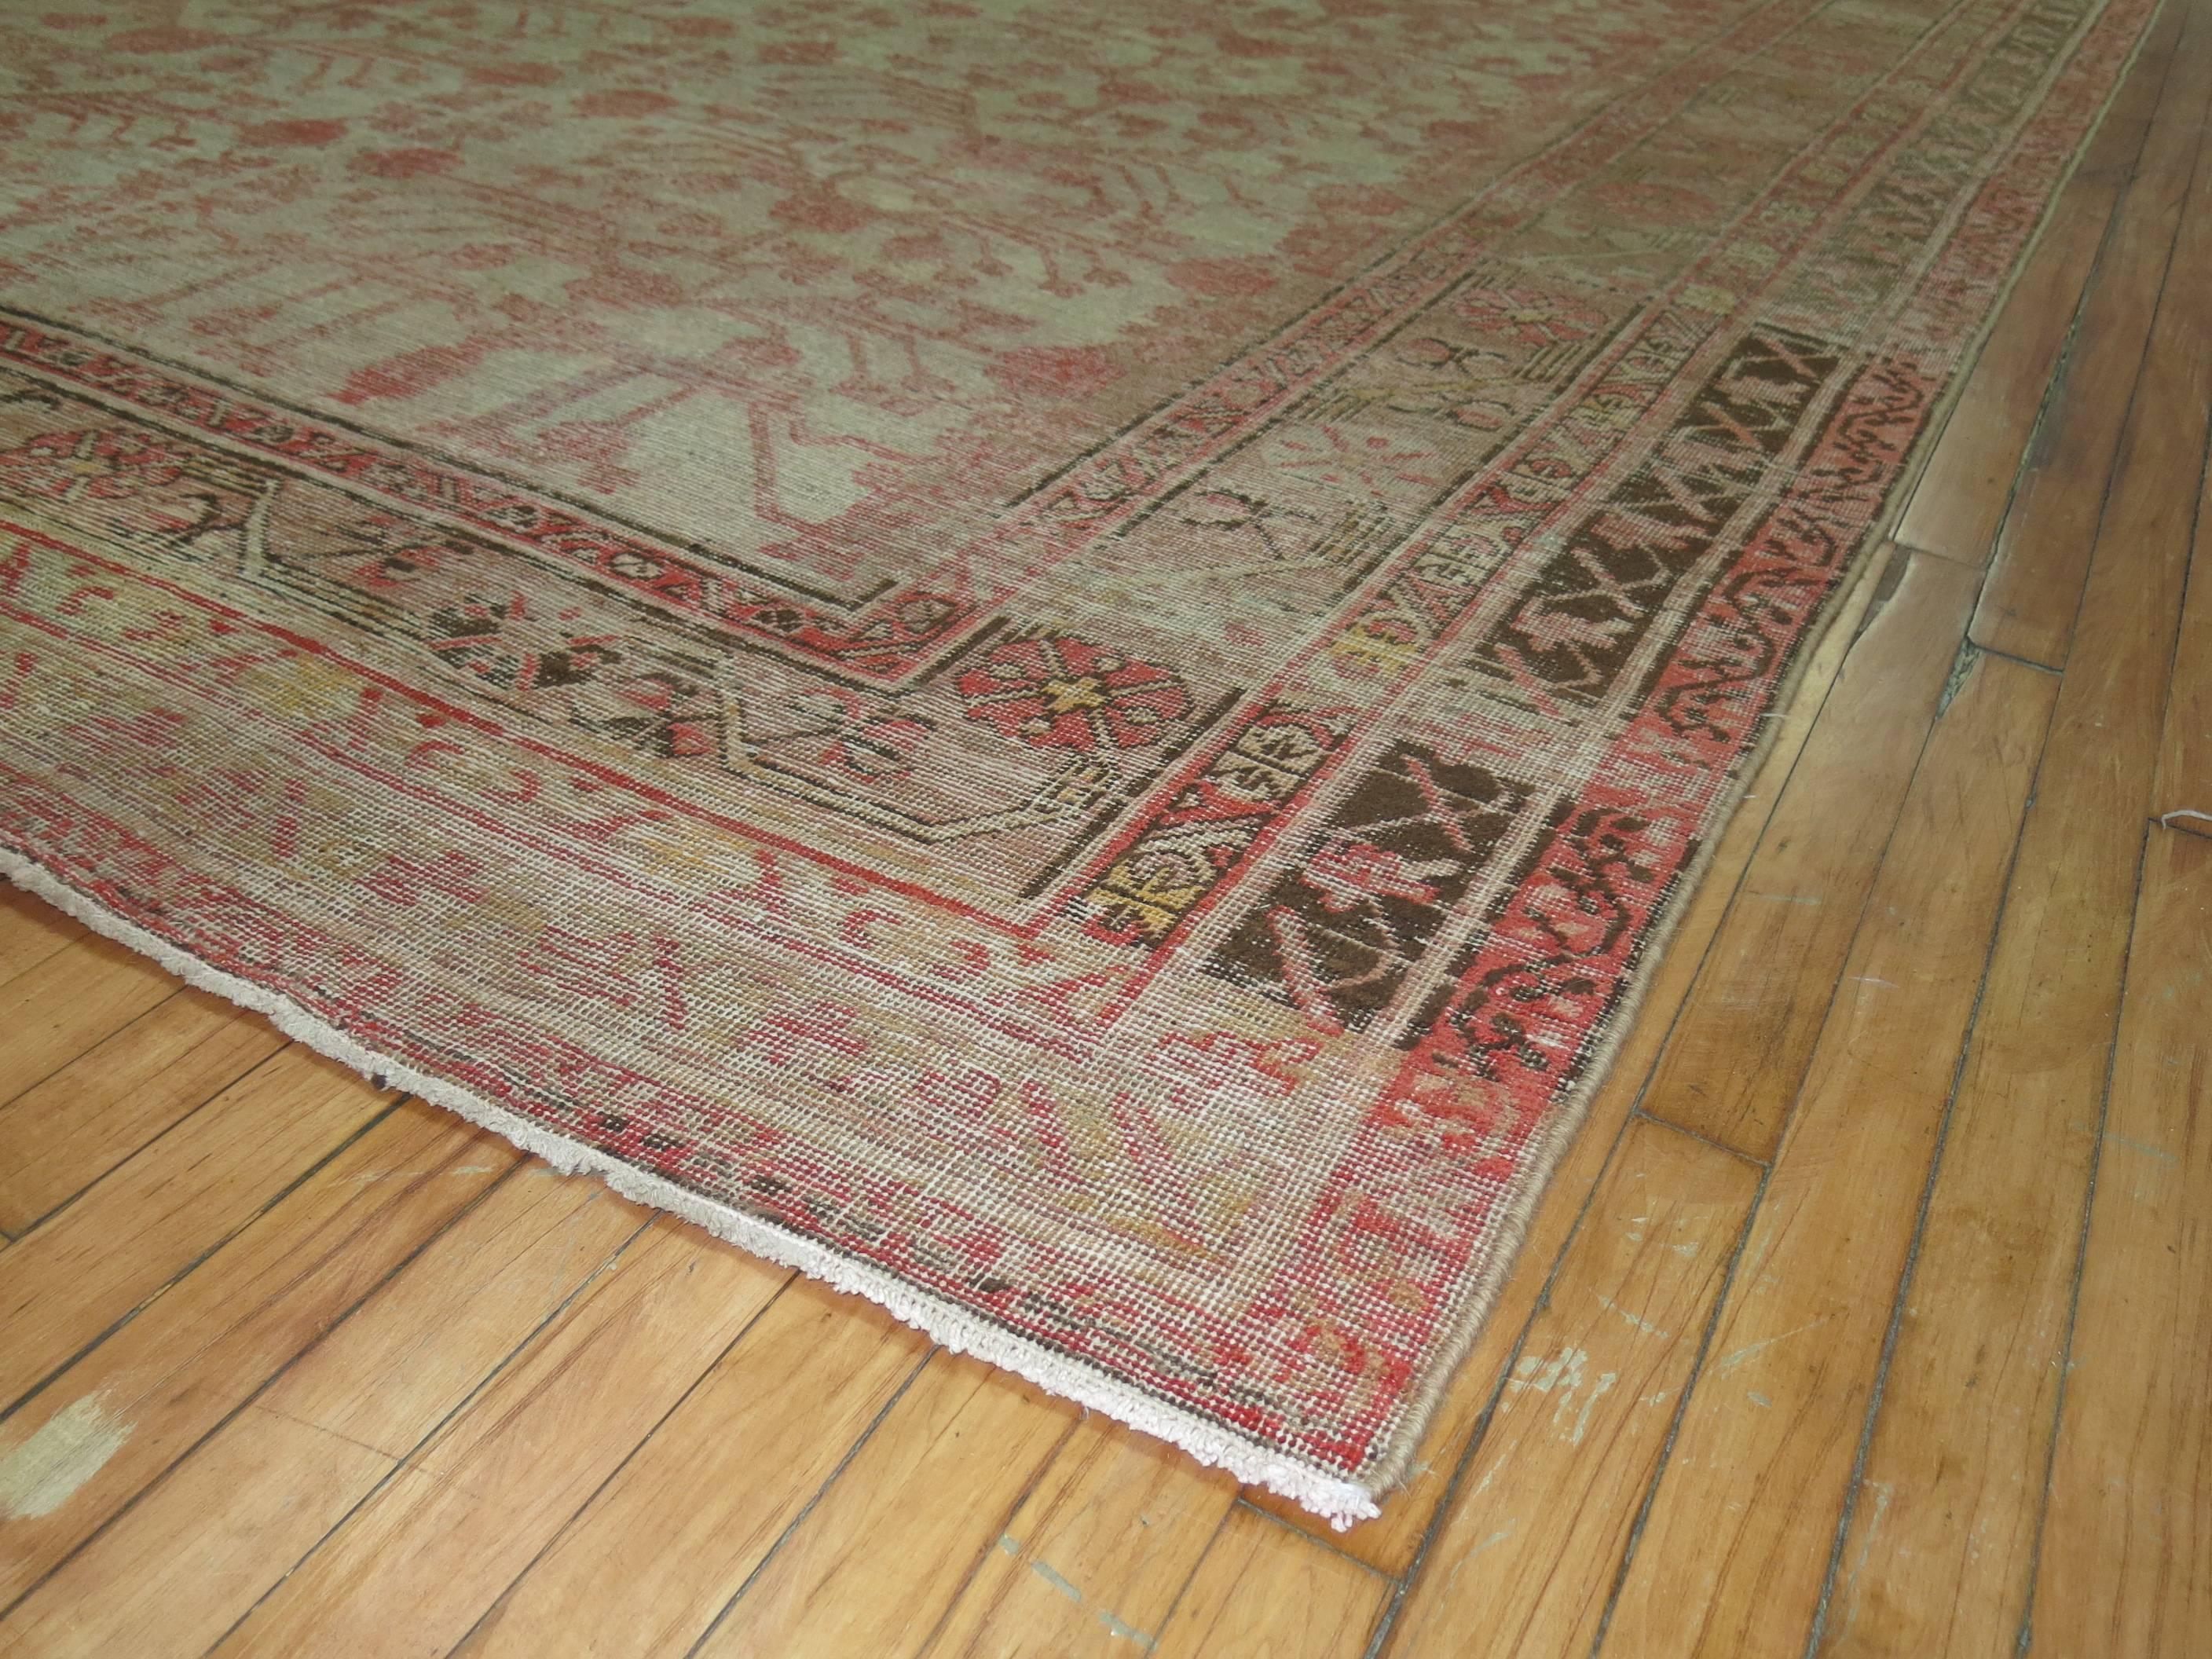 Pomegranate Khotan Shabby Chic Late 19th Century Large Gallery Size Rug In Fair Condition For Sale In New York, NY